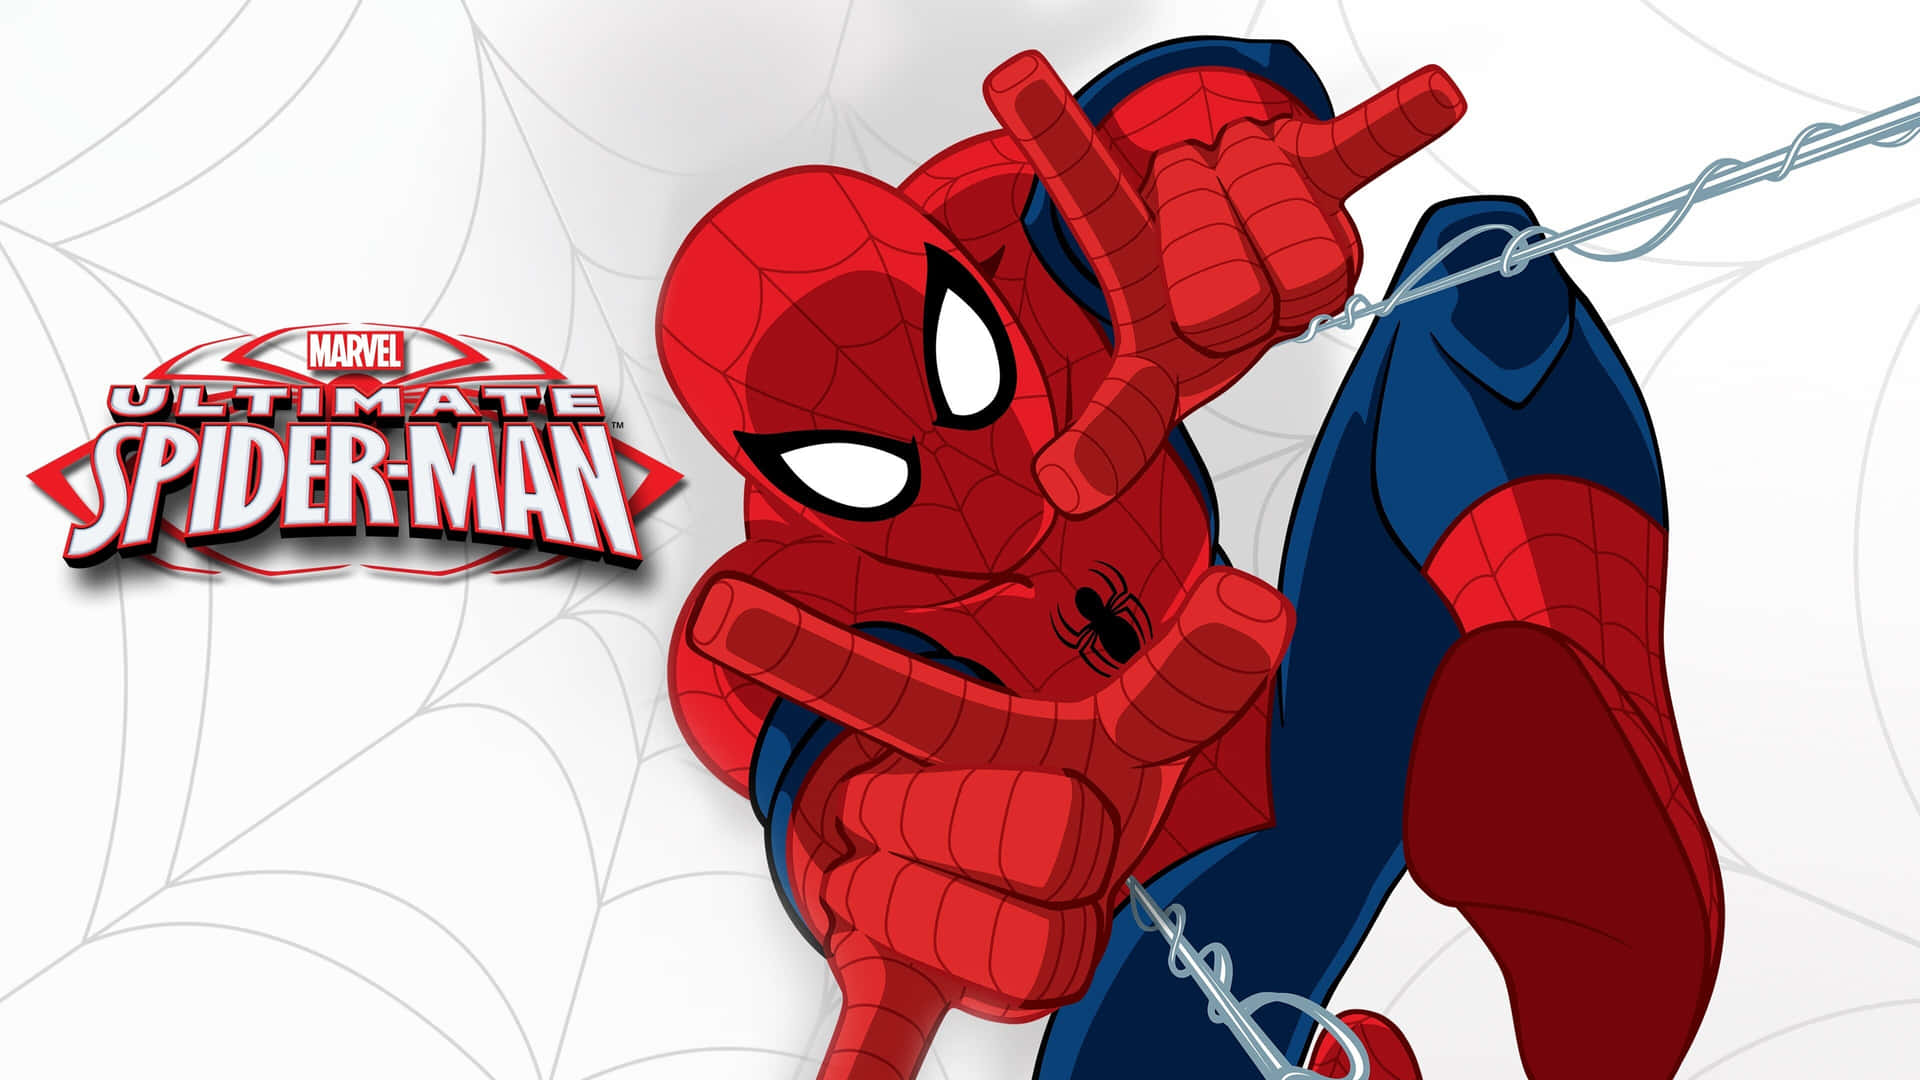 Swing into Action with Ultimate Spider-Man Wallpaper